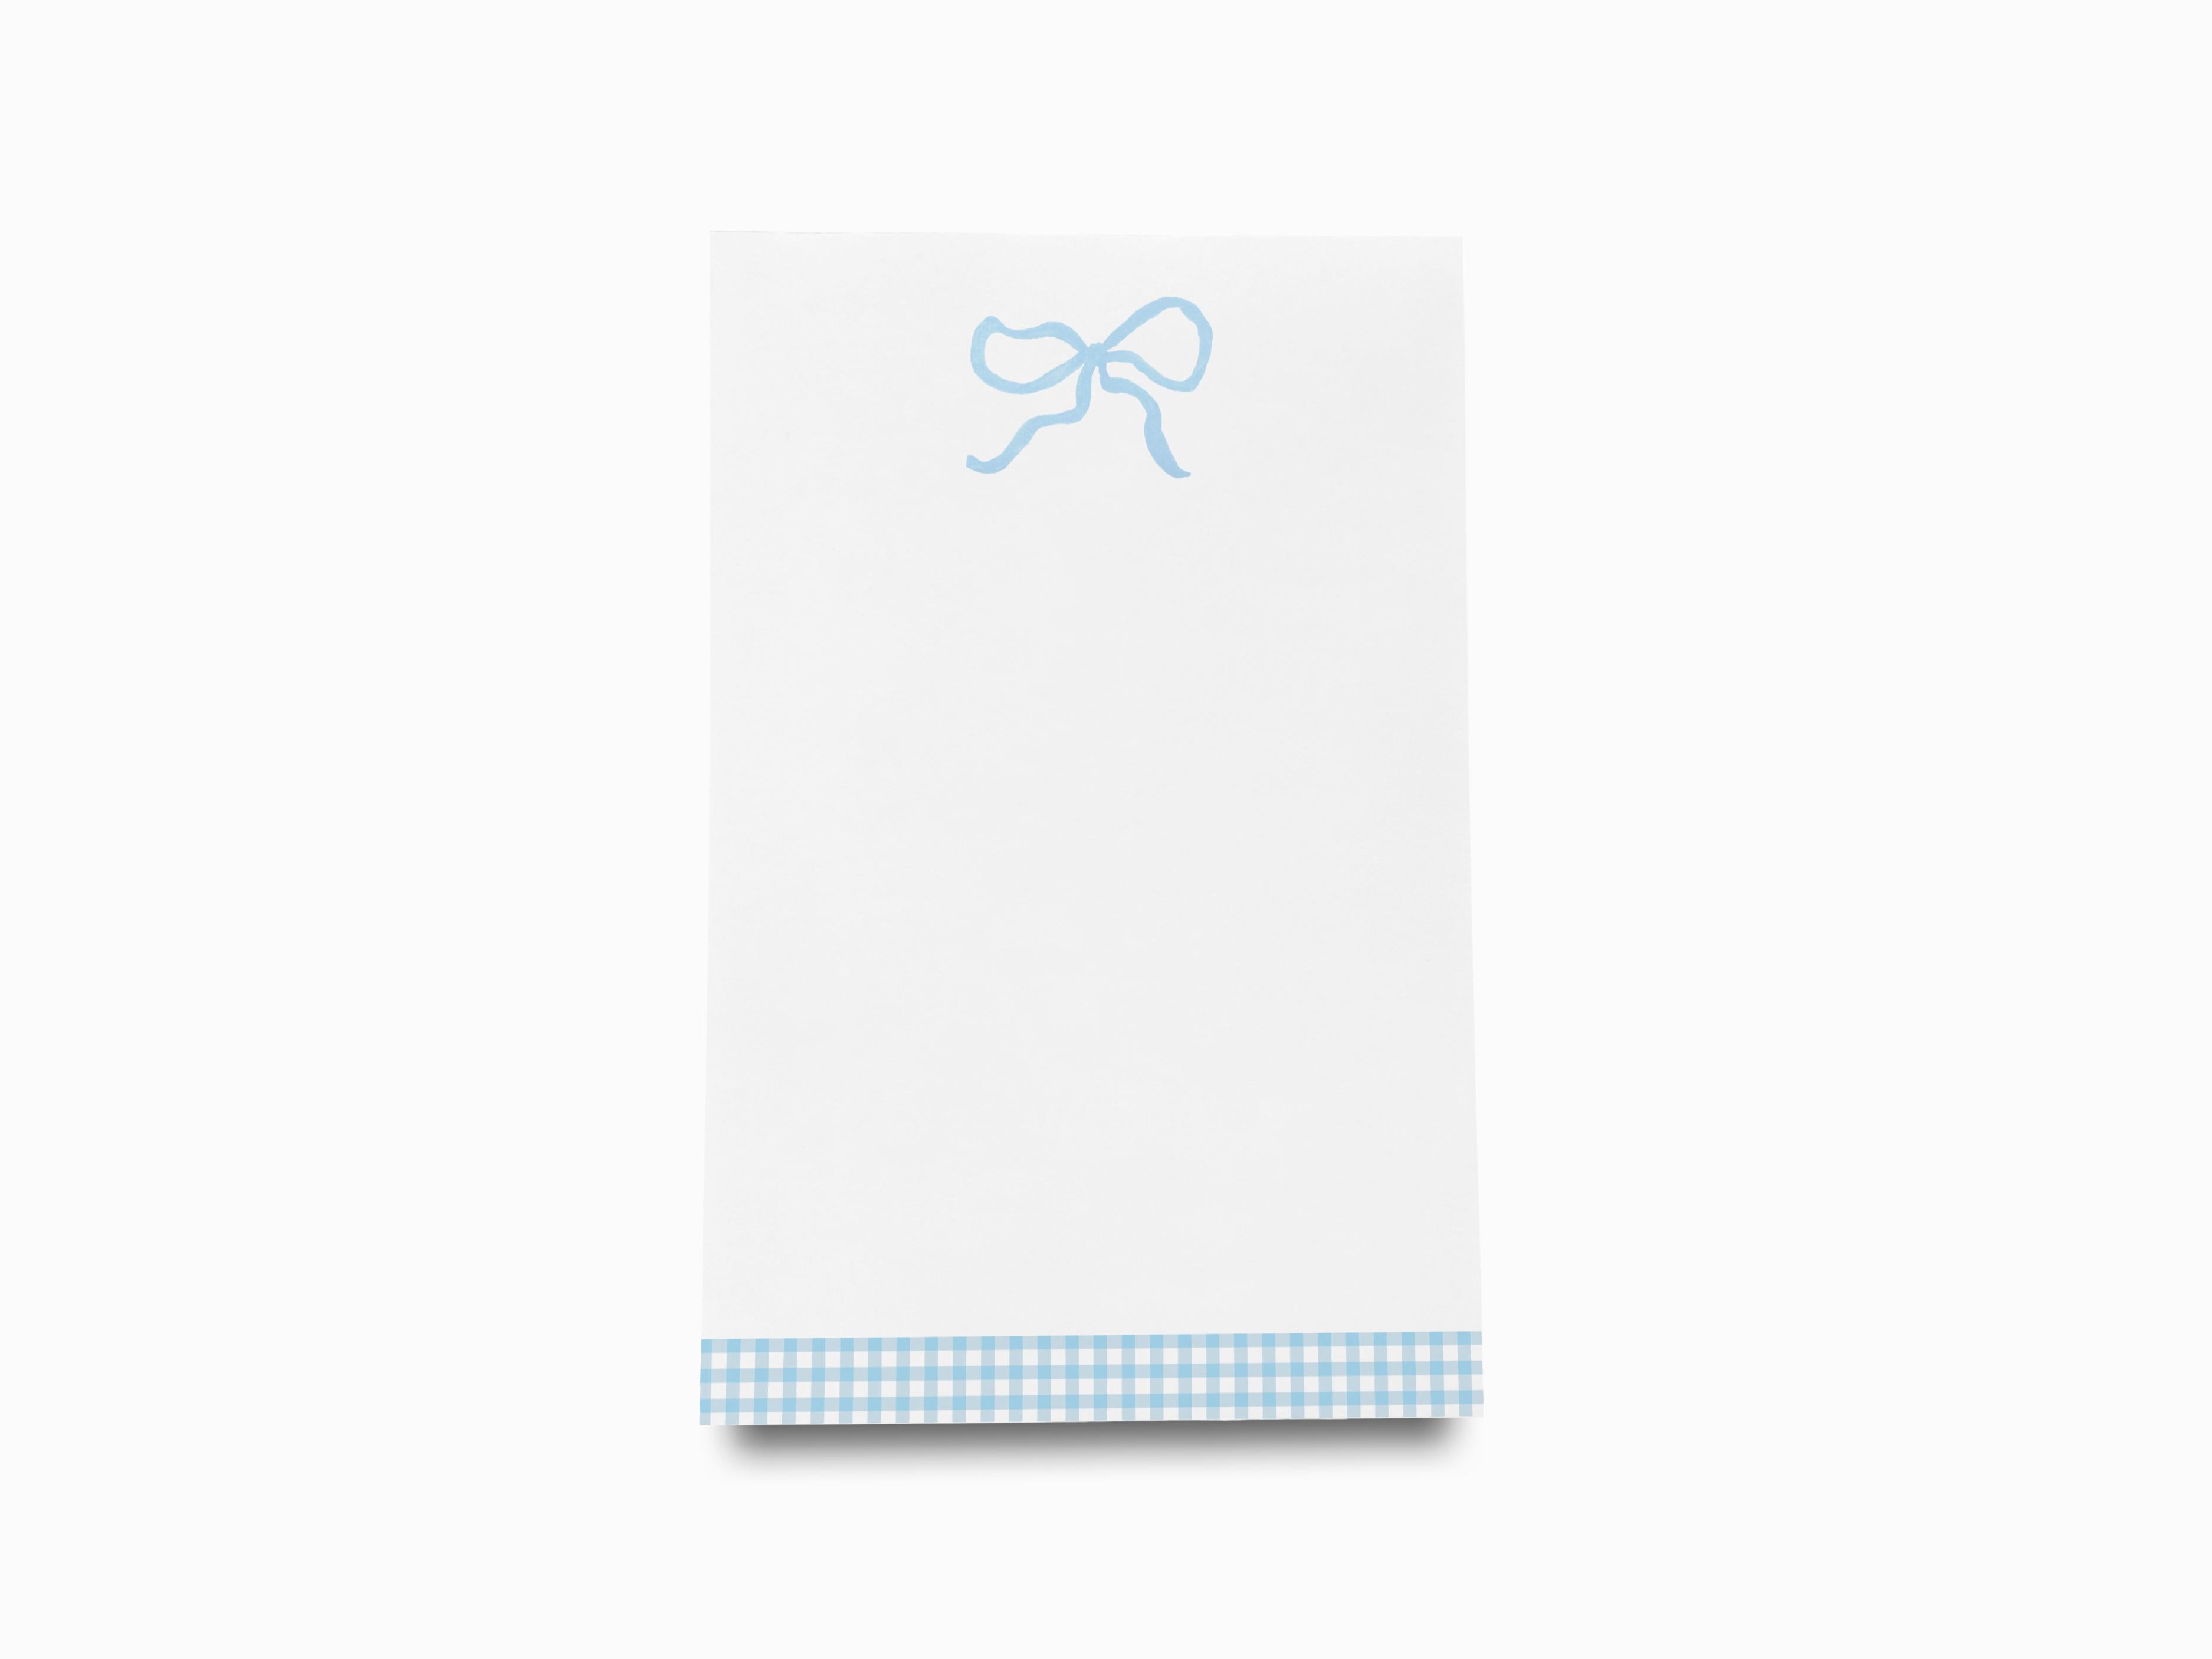 Light Blue Bow Notepad-These notepads feature our hand-painted watercolor bow, printed in the USA on a beautiful smooth stock. You choose which size you want (or bundled together for a beautiful gift set) and makes a great gift for the checklist and feminine bow lover in your life.-The Singing Little Bird